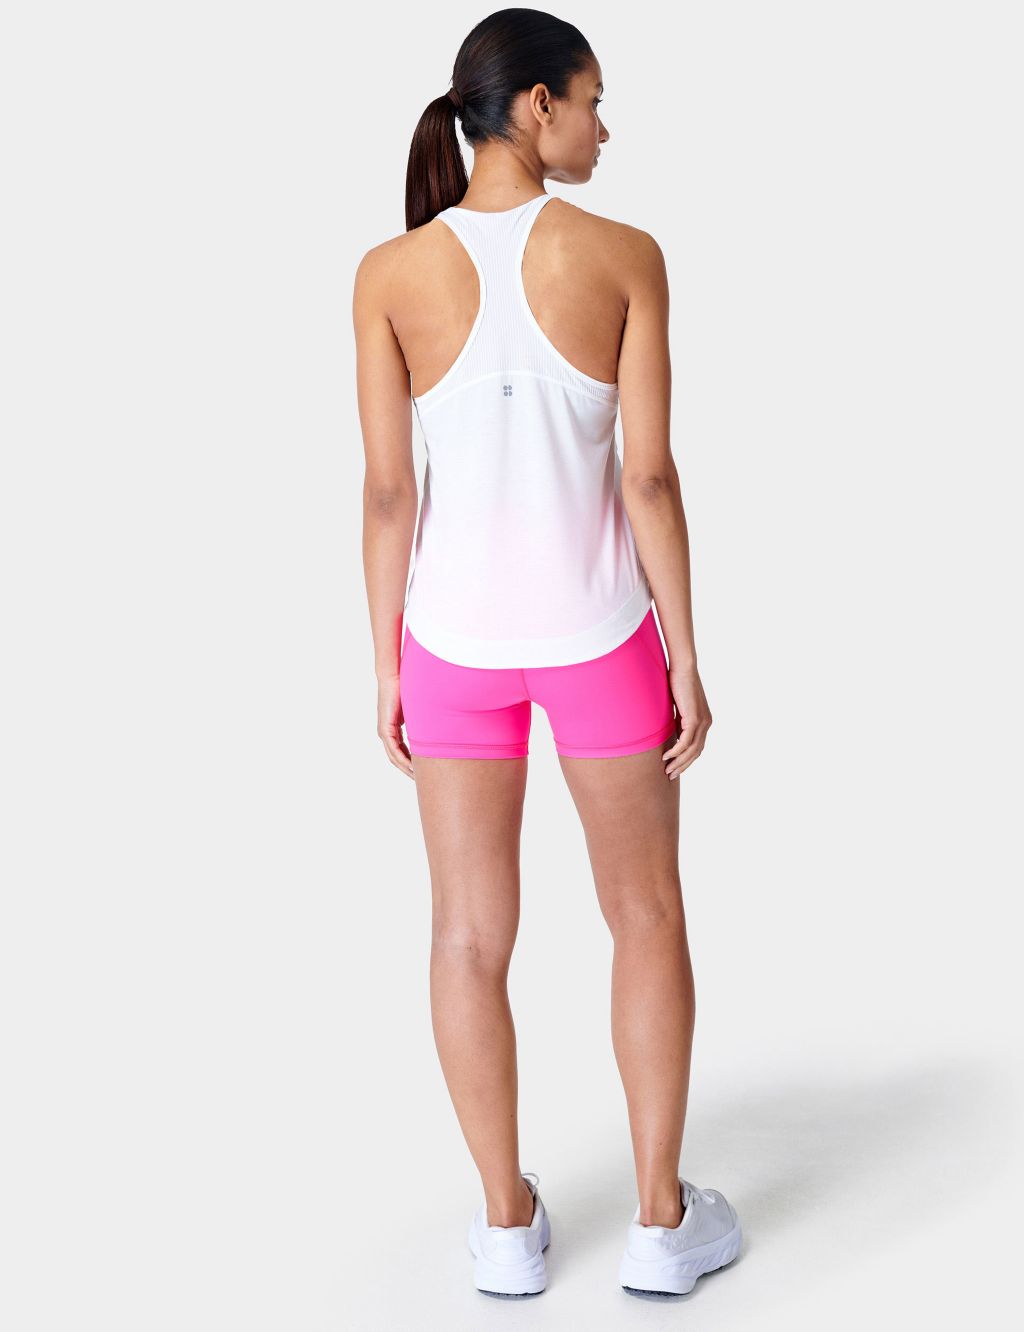 Breathe Easy Relaxed Vest Top image 3